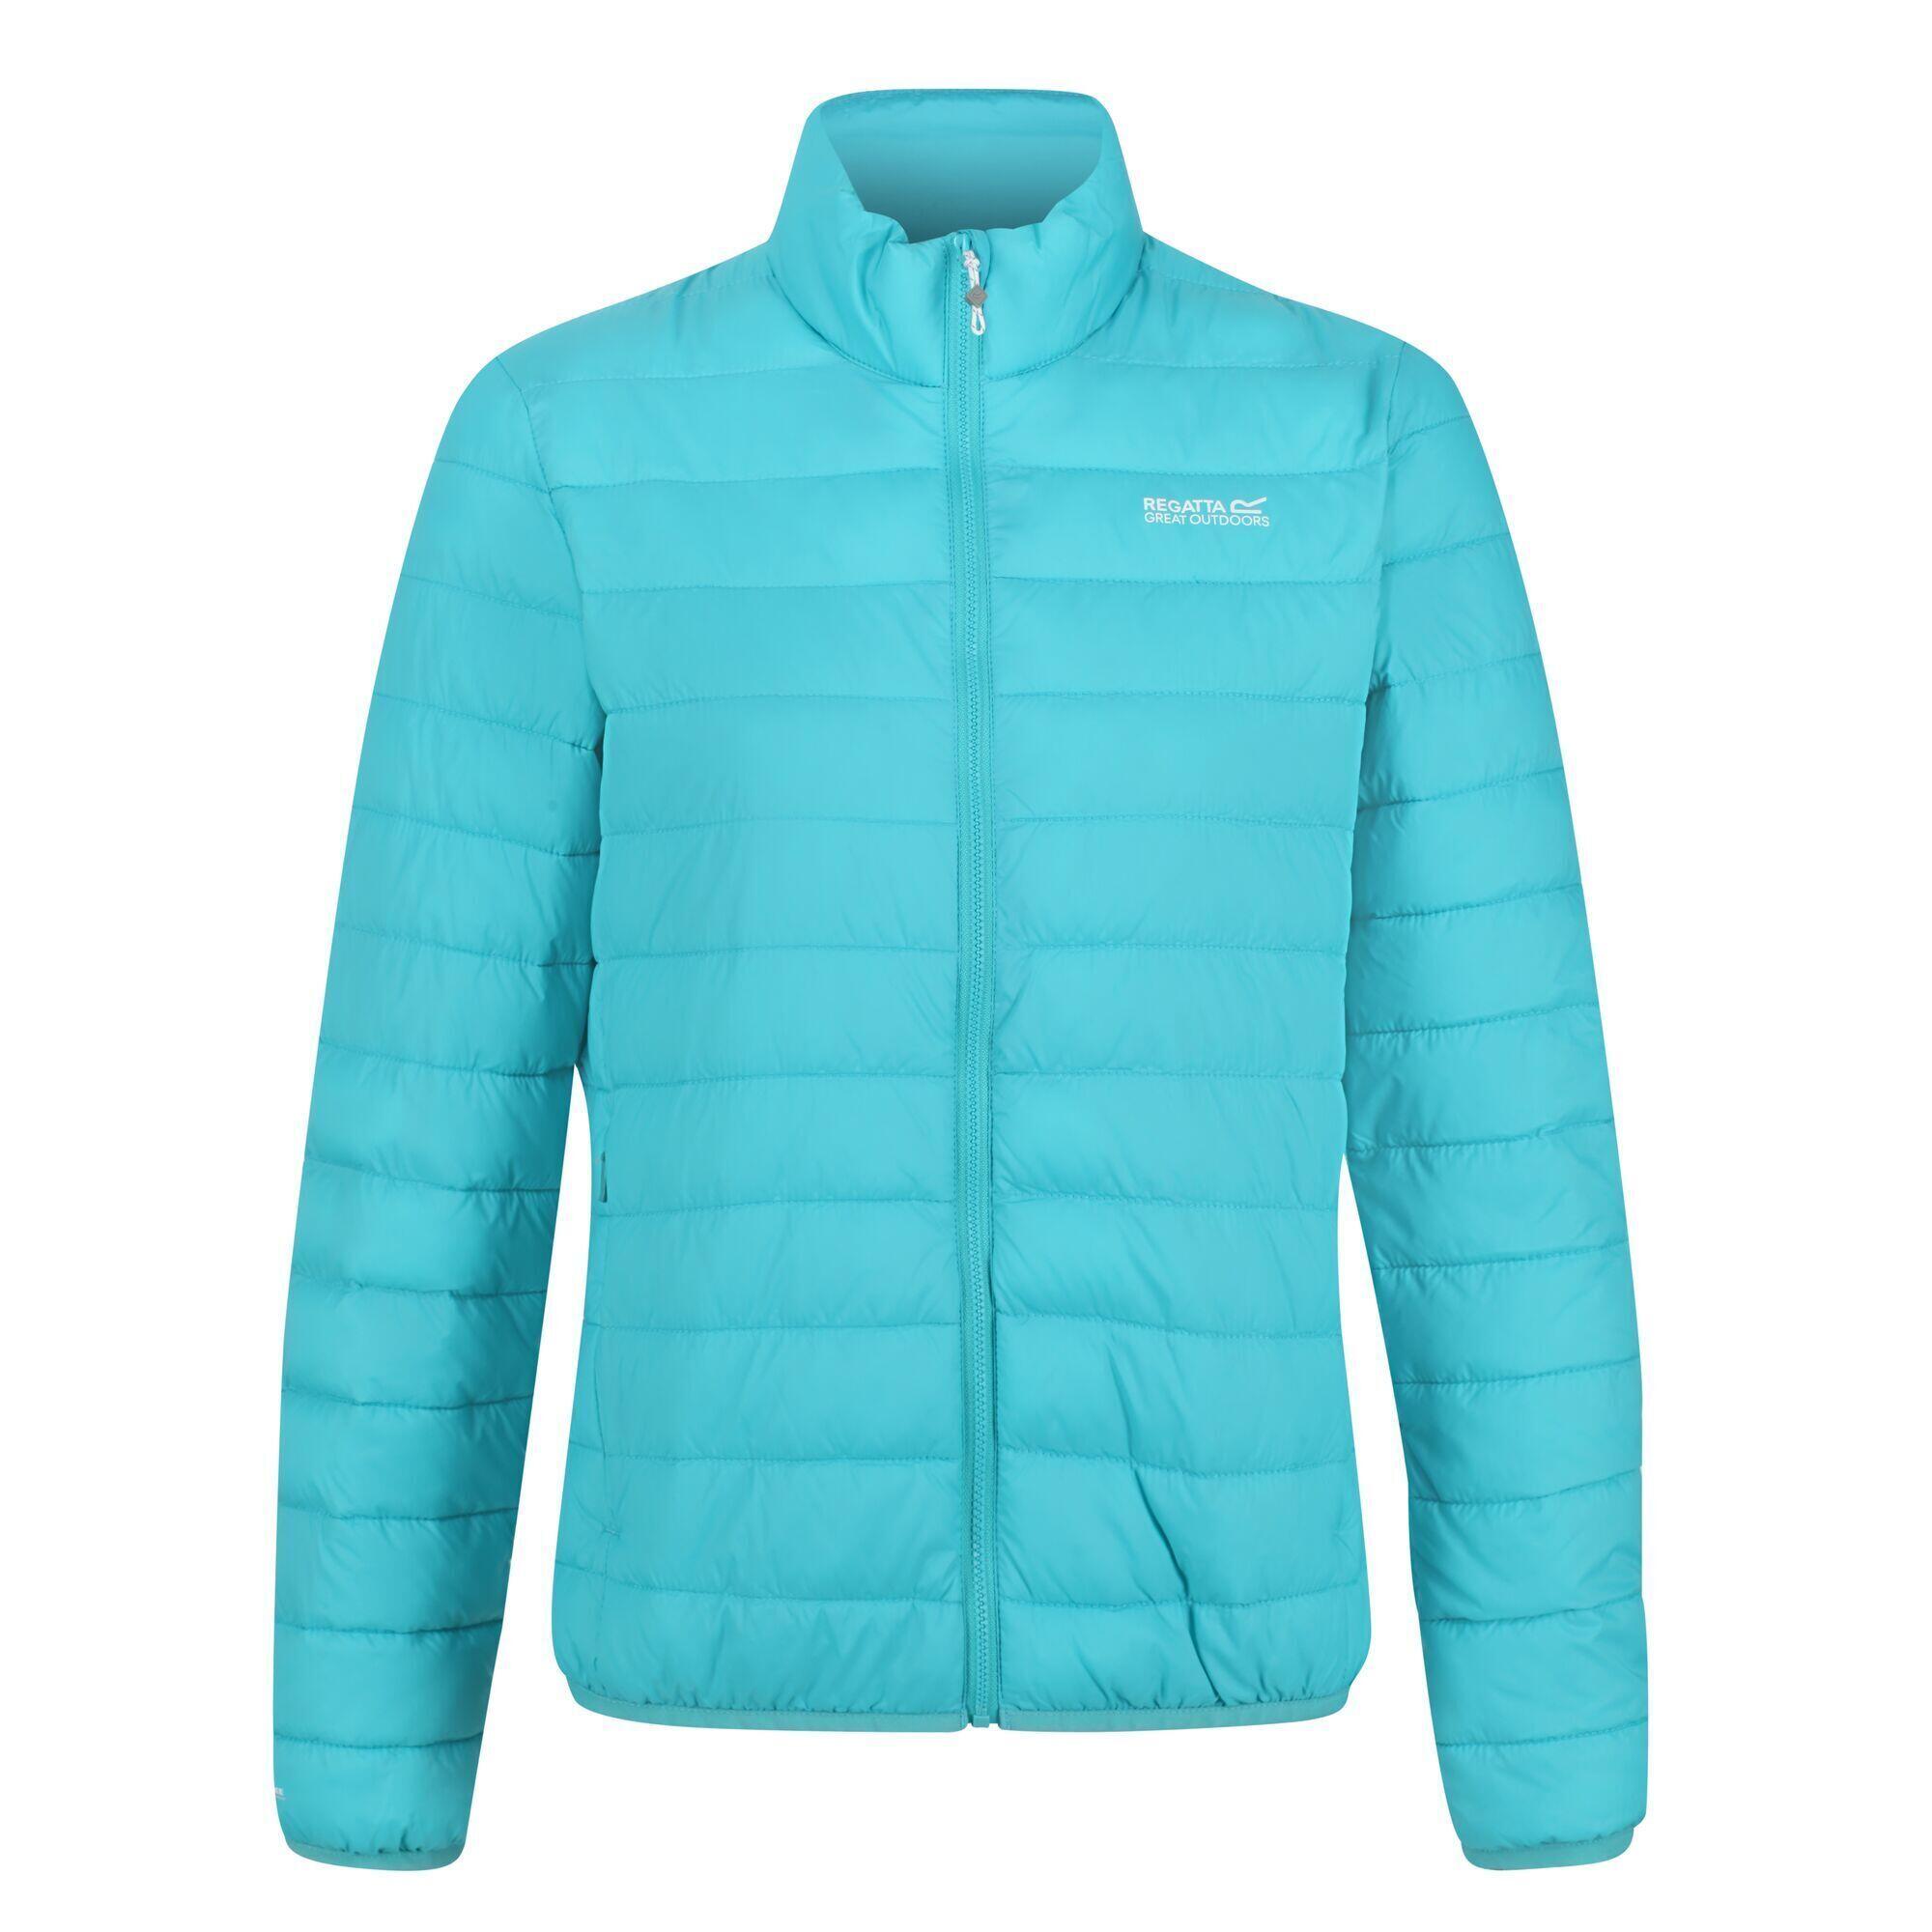 Womens/Ladies Hillpack Padded Jacket (Turquoise) 1/4